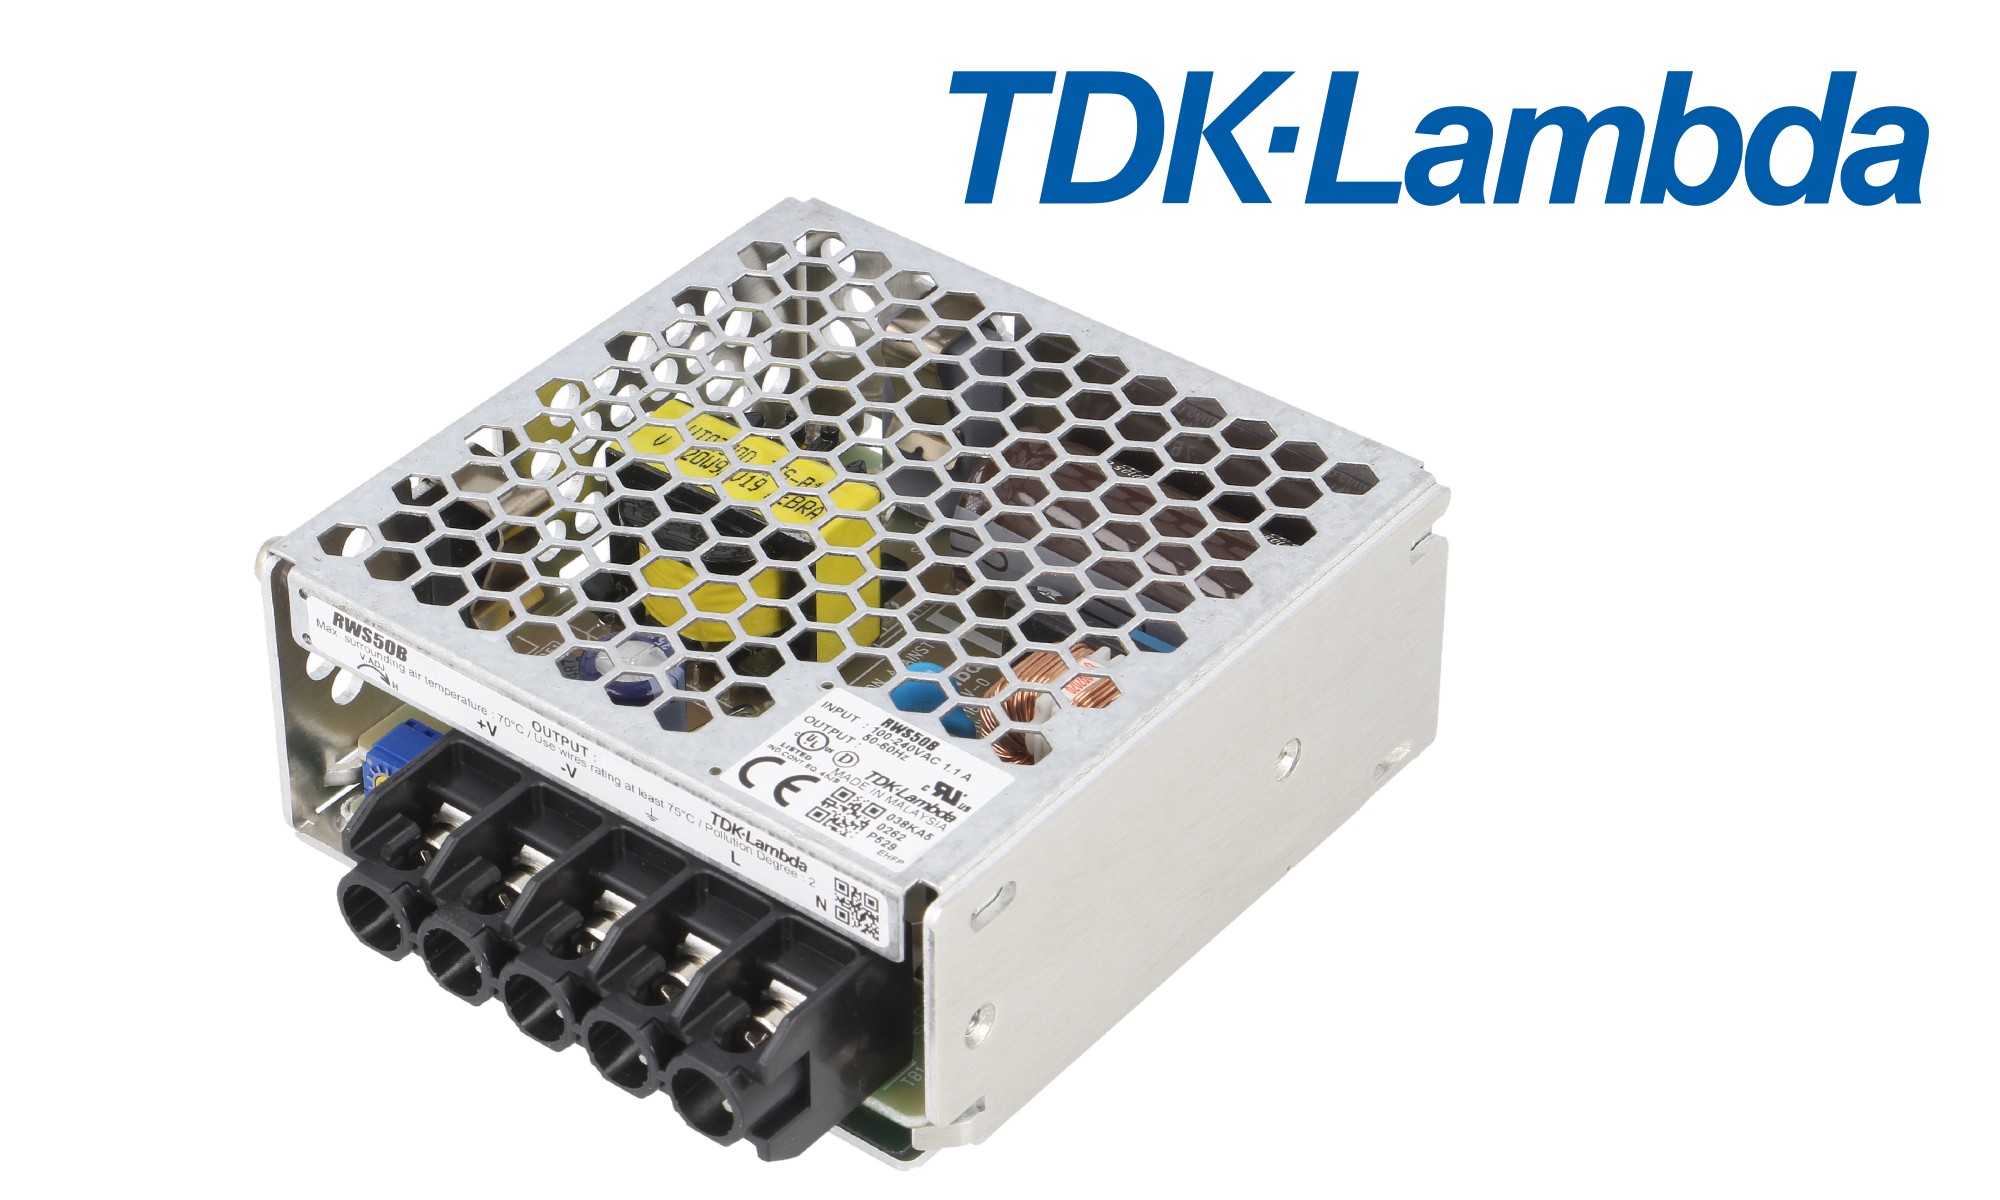 General Purpose Industrial Power Supplies offered by TDK Lambda